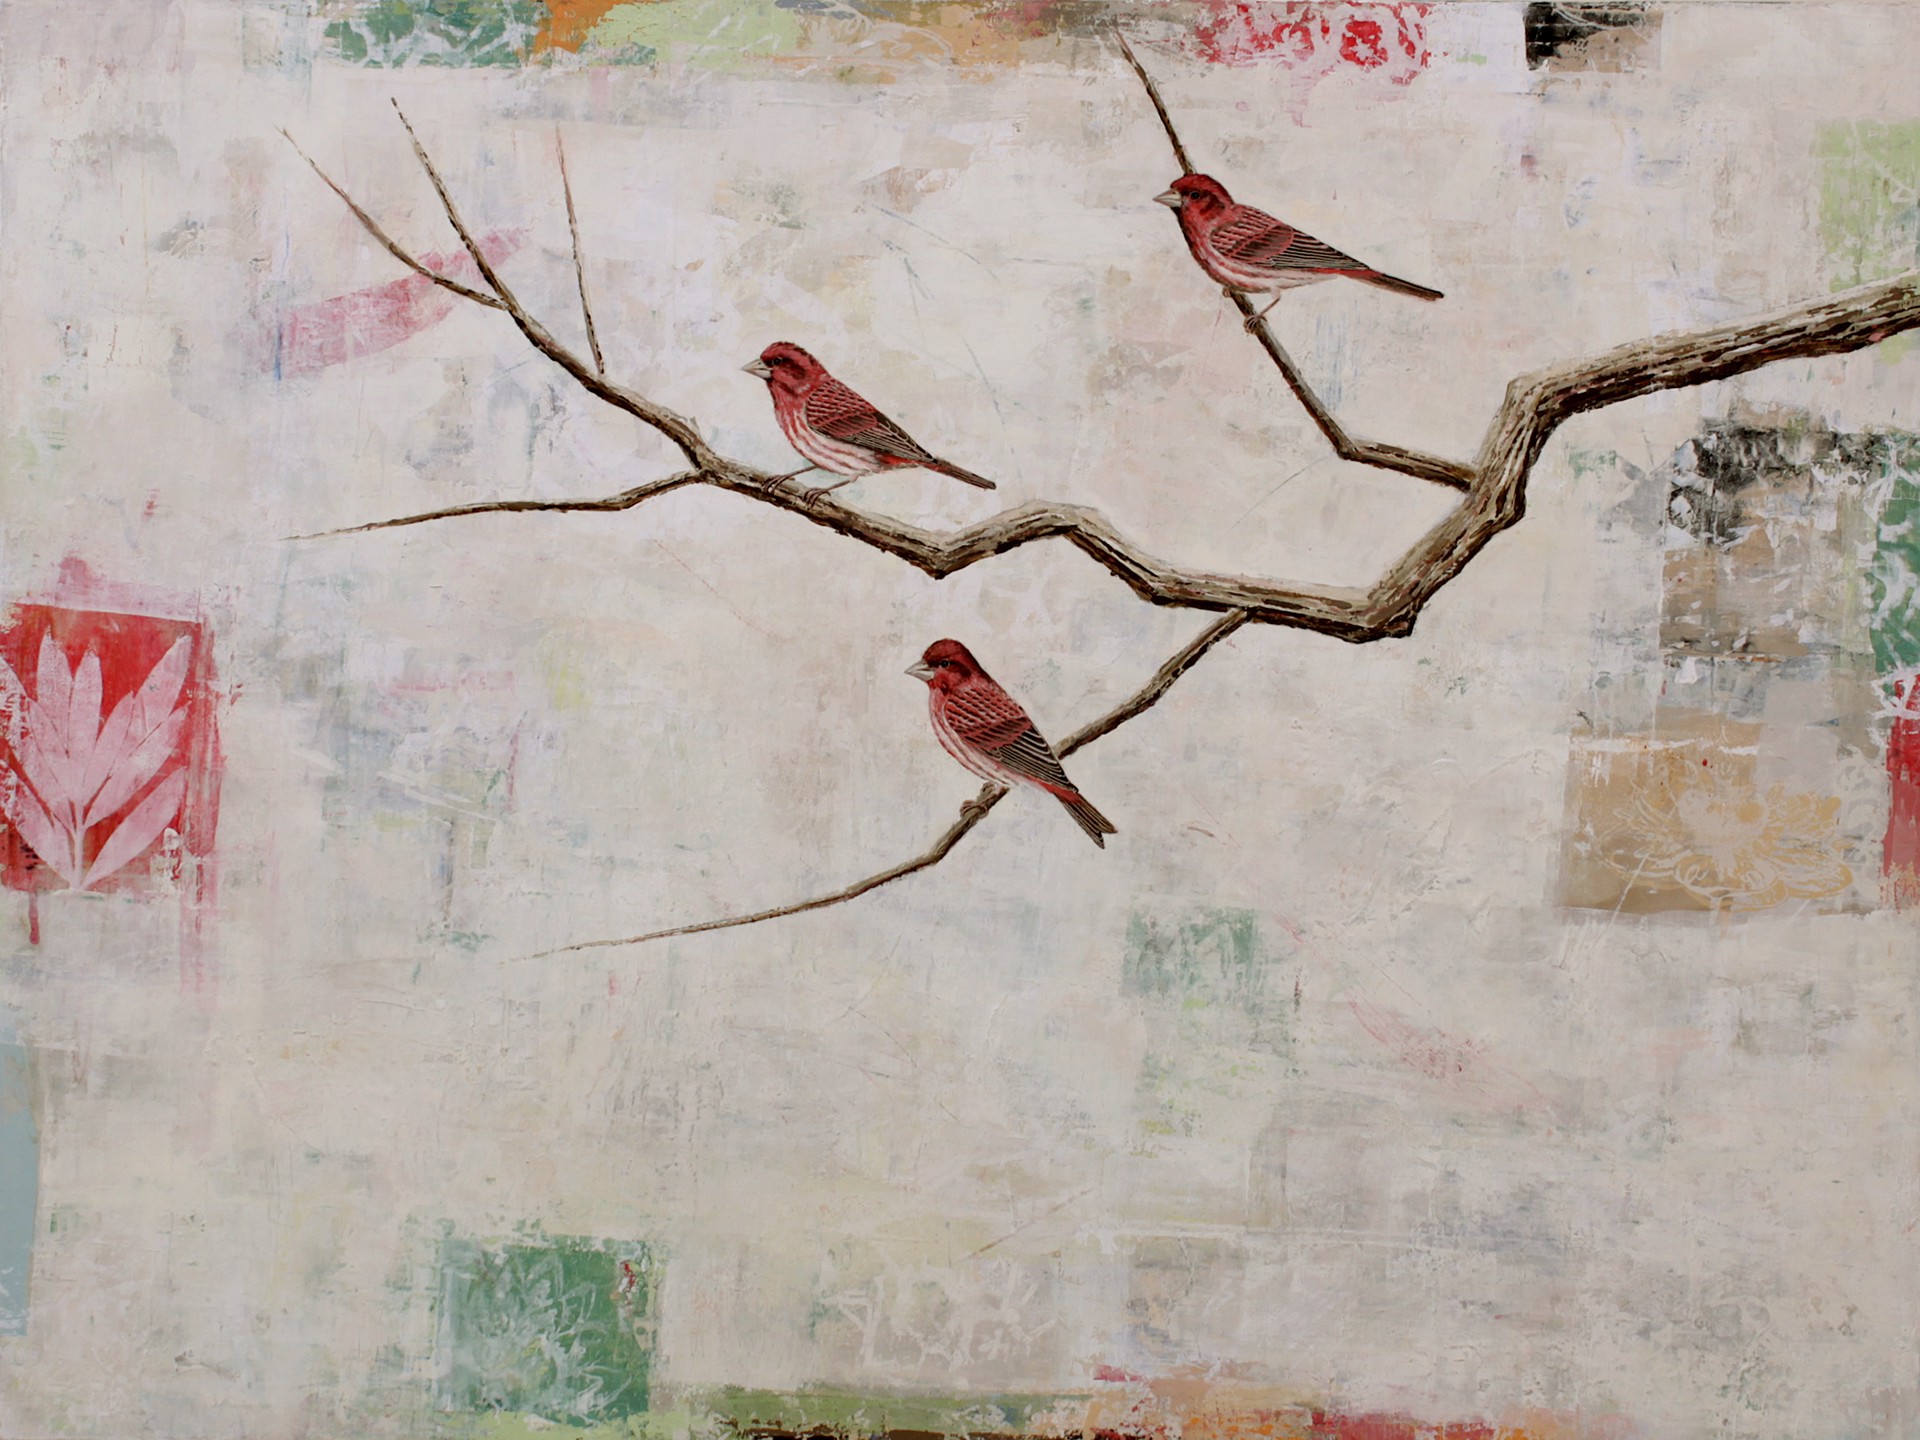 Purple Finches by Paul Brigham